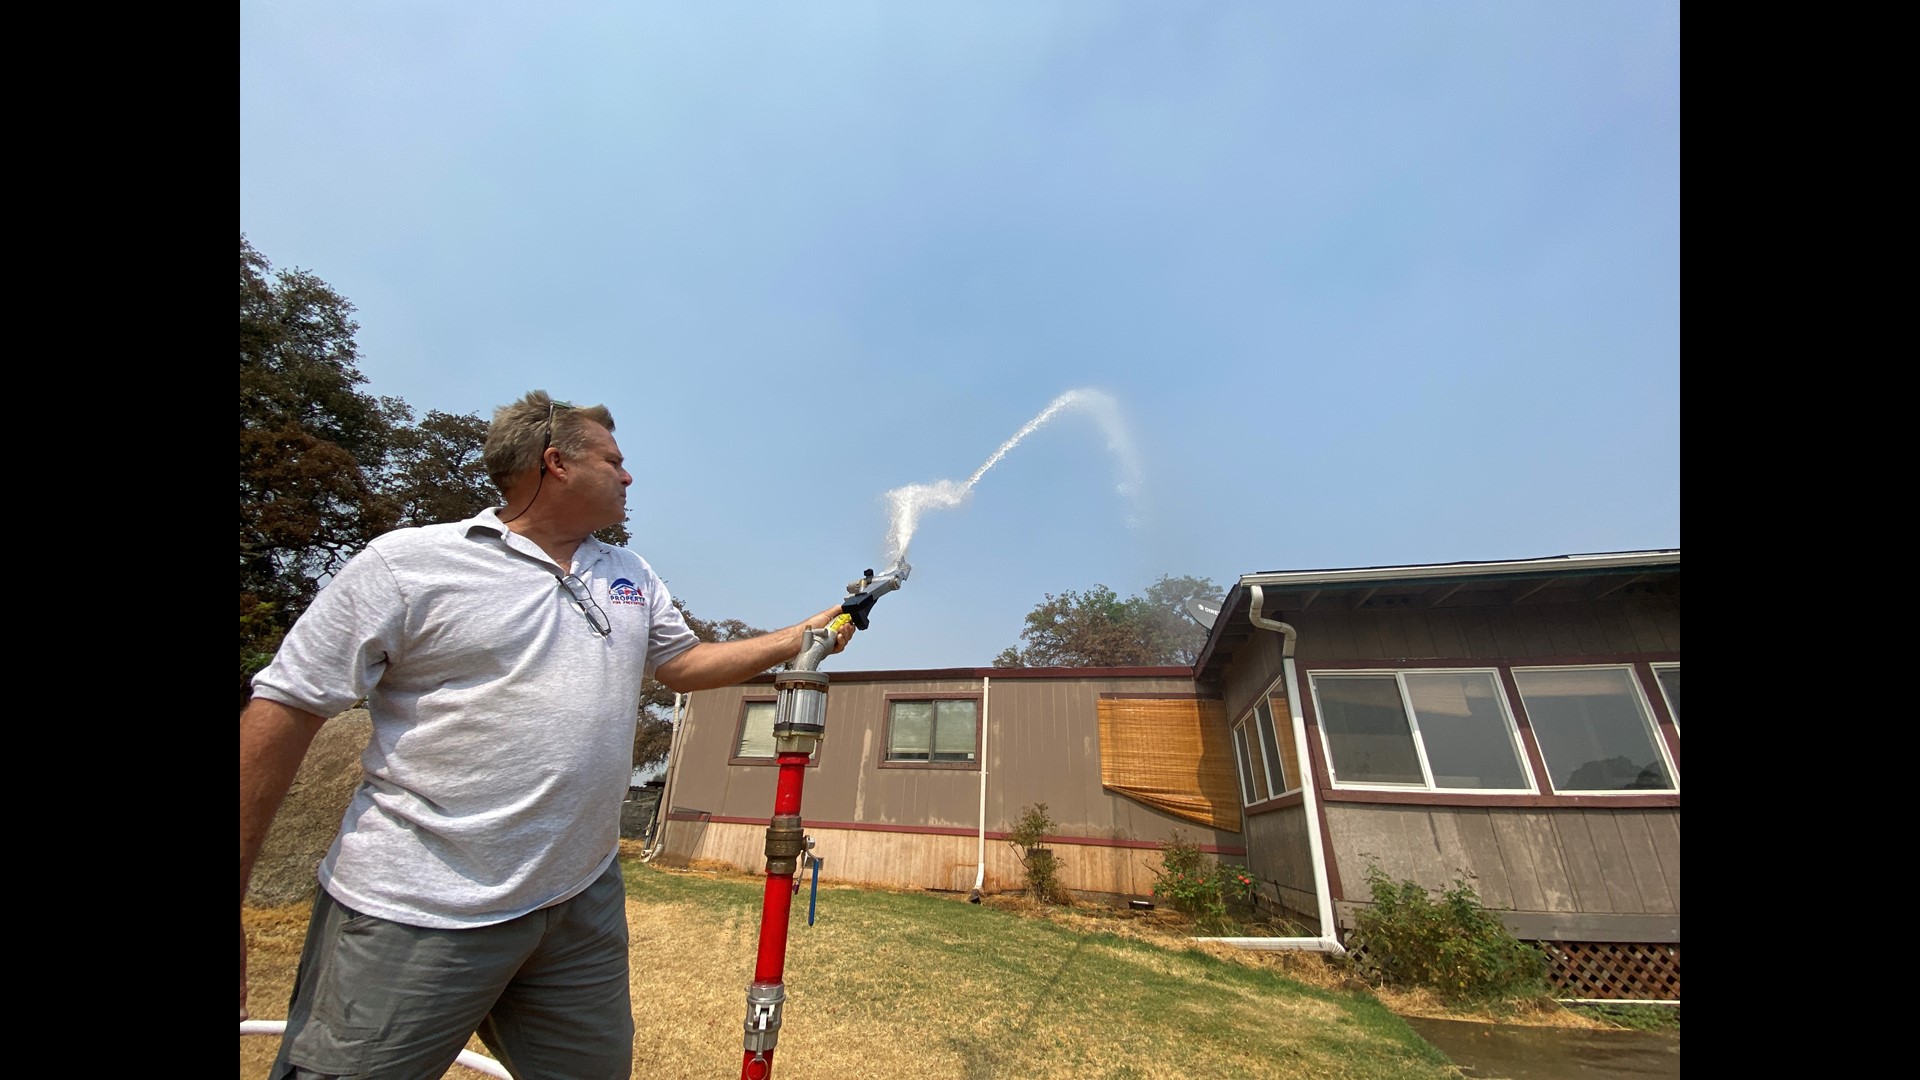 The sprinkler is designed as extra insurance for people in fire prone areas. It's meant to help in addition to creating defensible space before fires start.